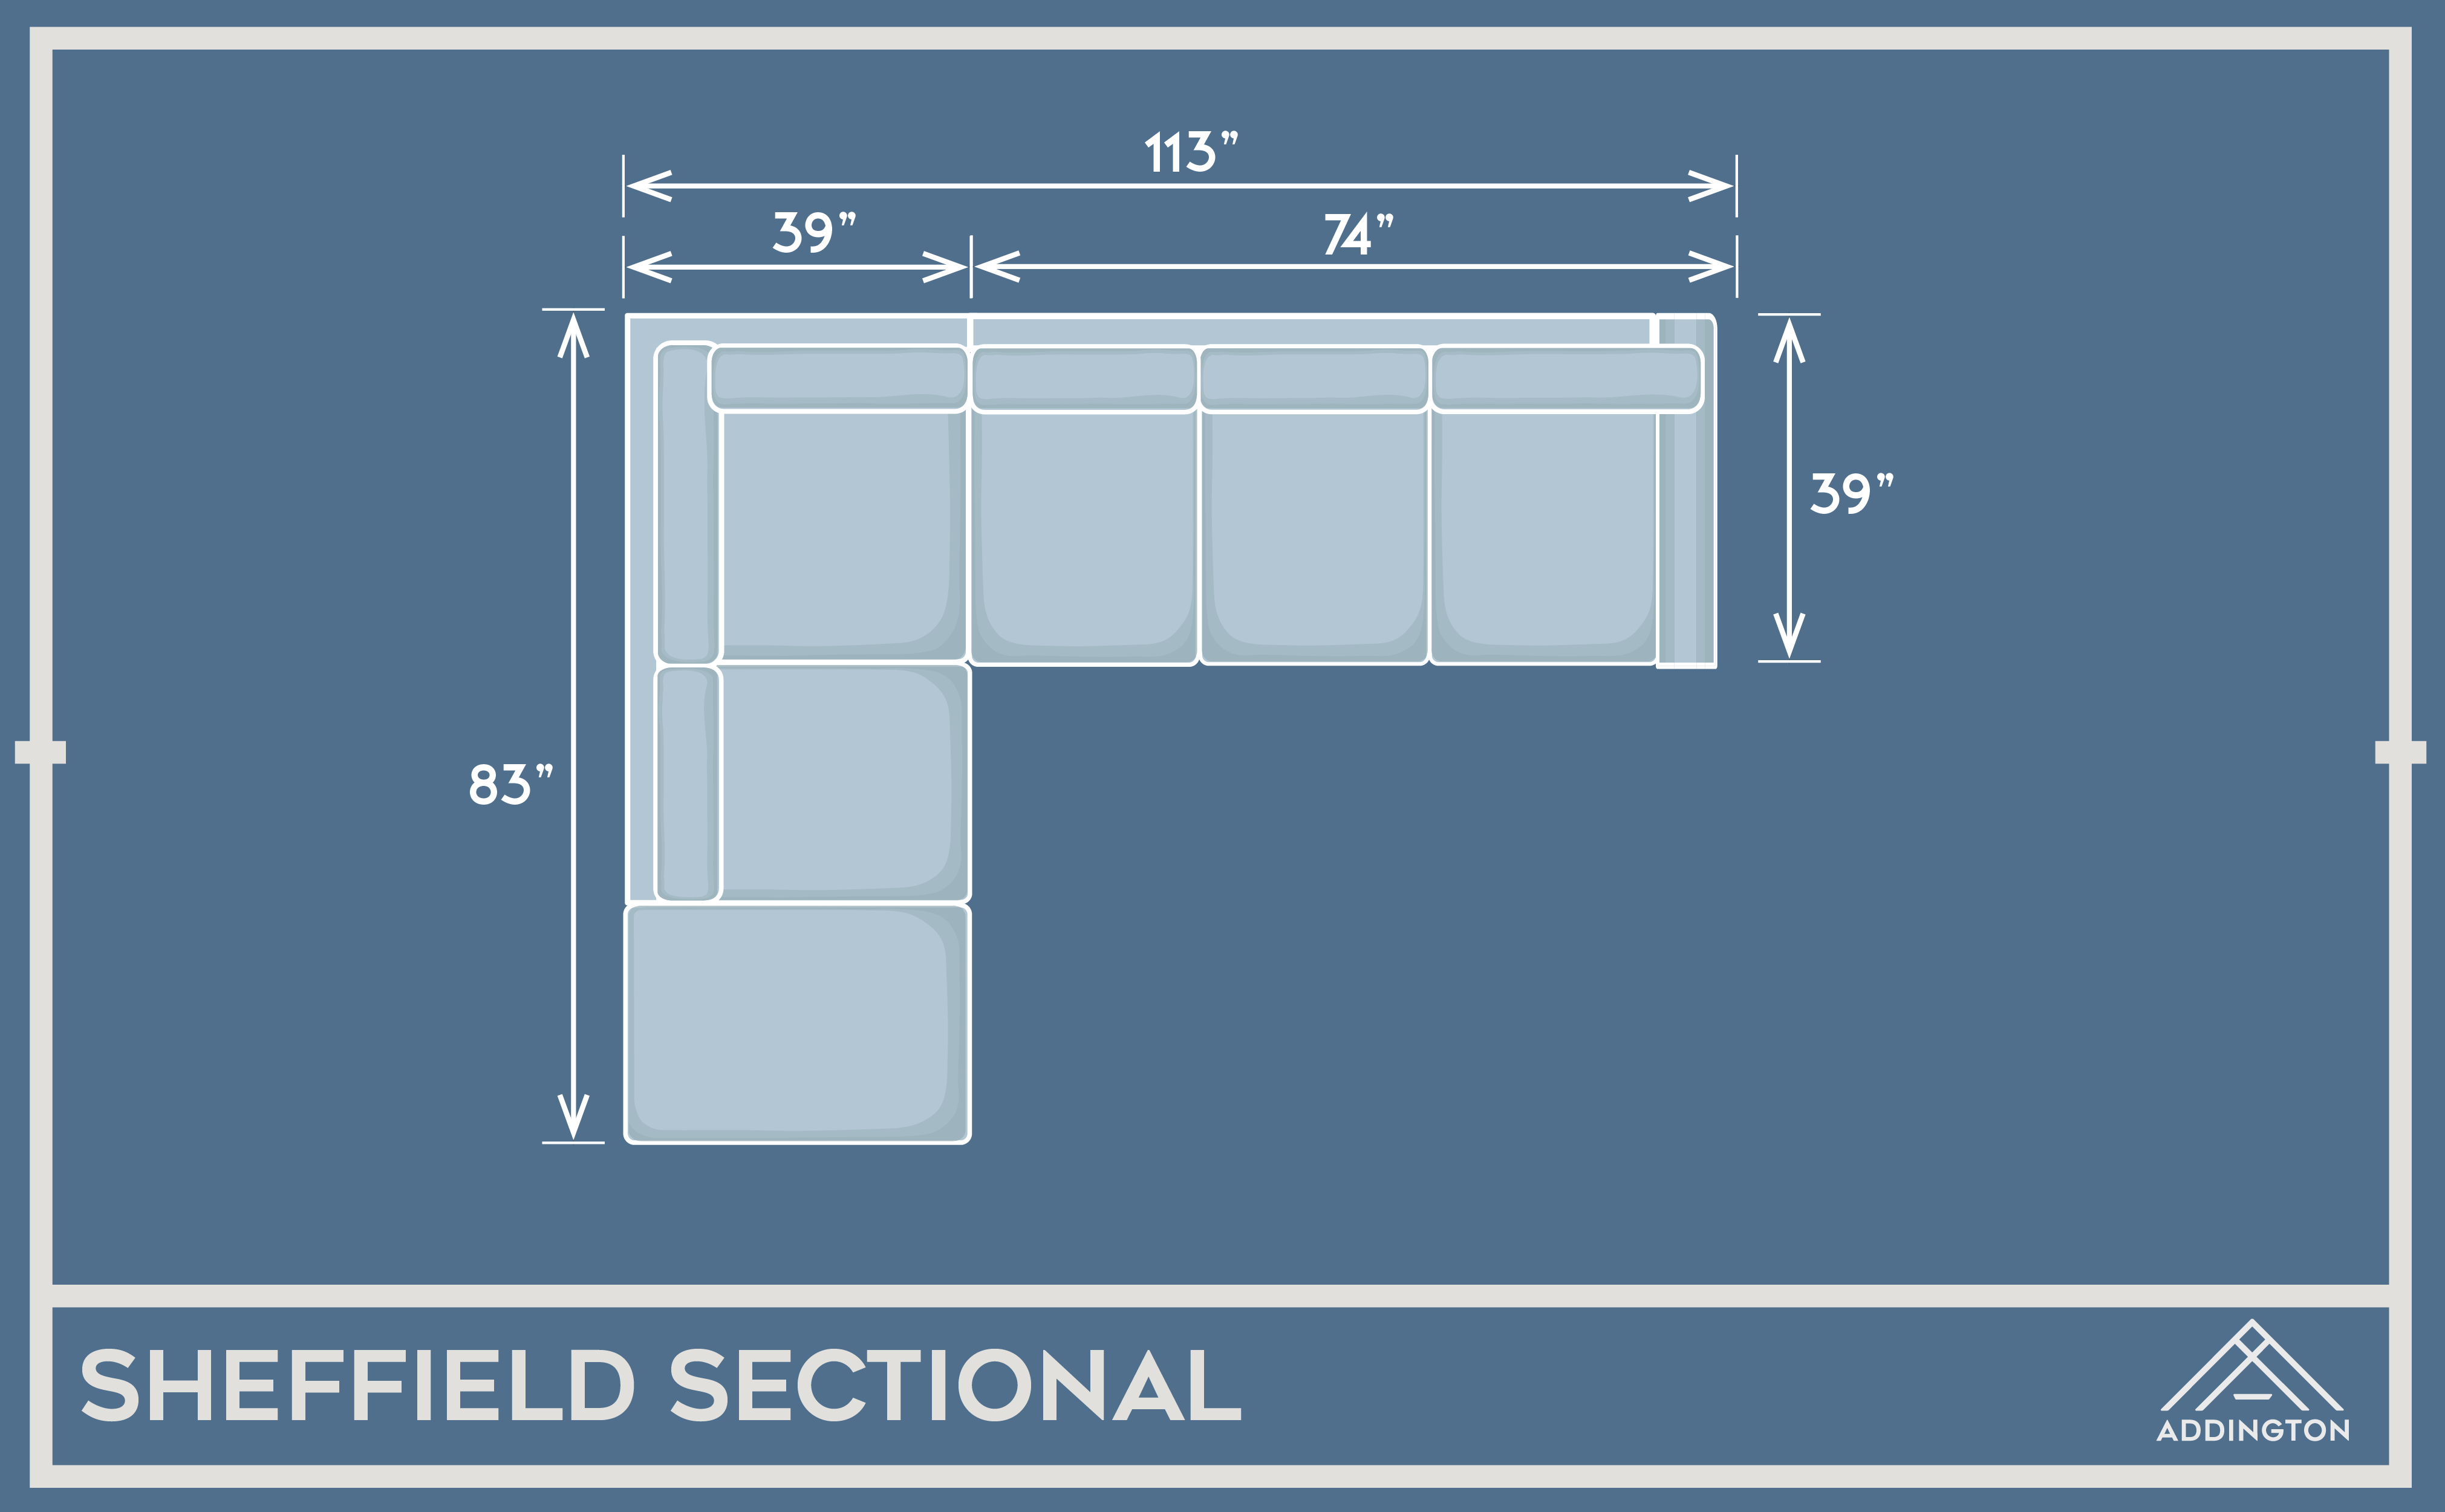 shefield sectioanl demsnions rectangle apluse.png__PID:56a4d071-4278-47a2-a563-182bd0598a2b